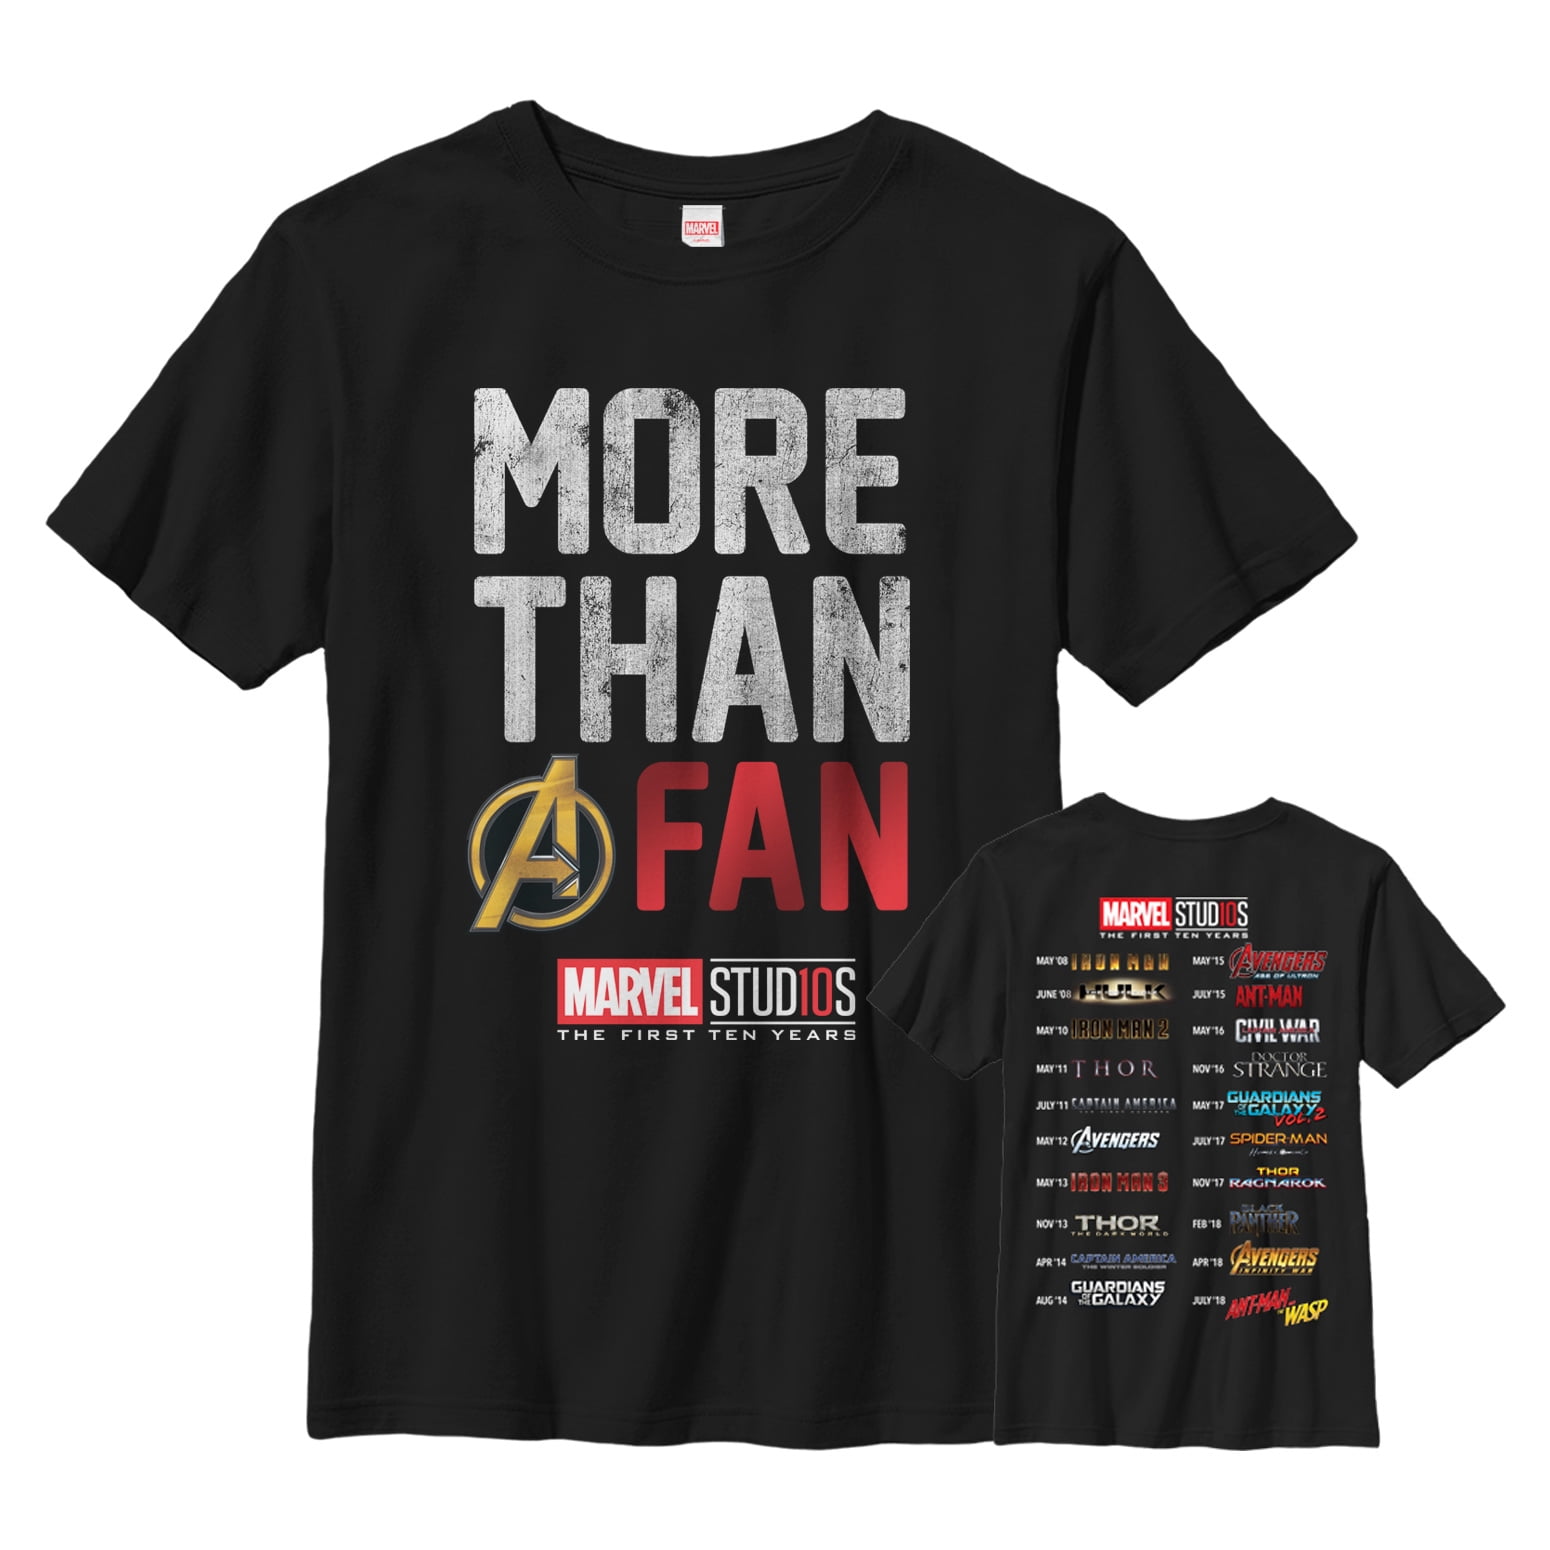 New Marvel 10th Anniversary More Than a Fan T shirt S-5XL 